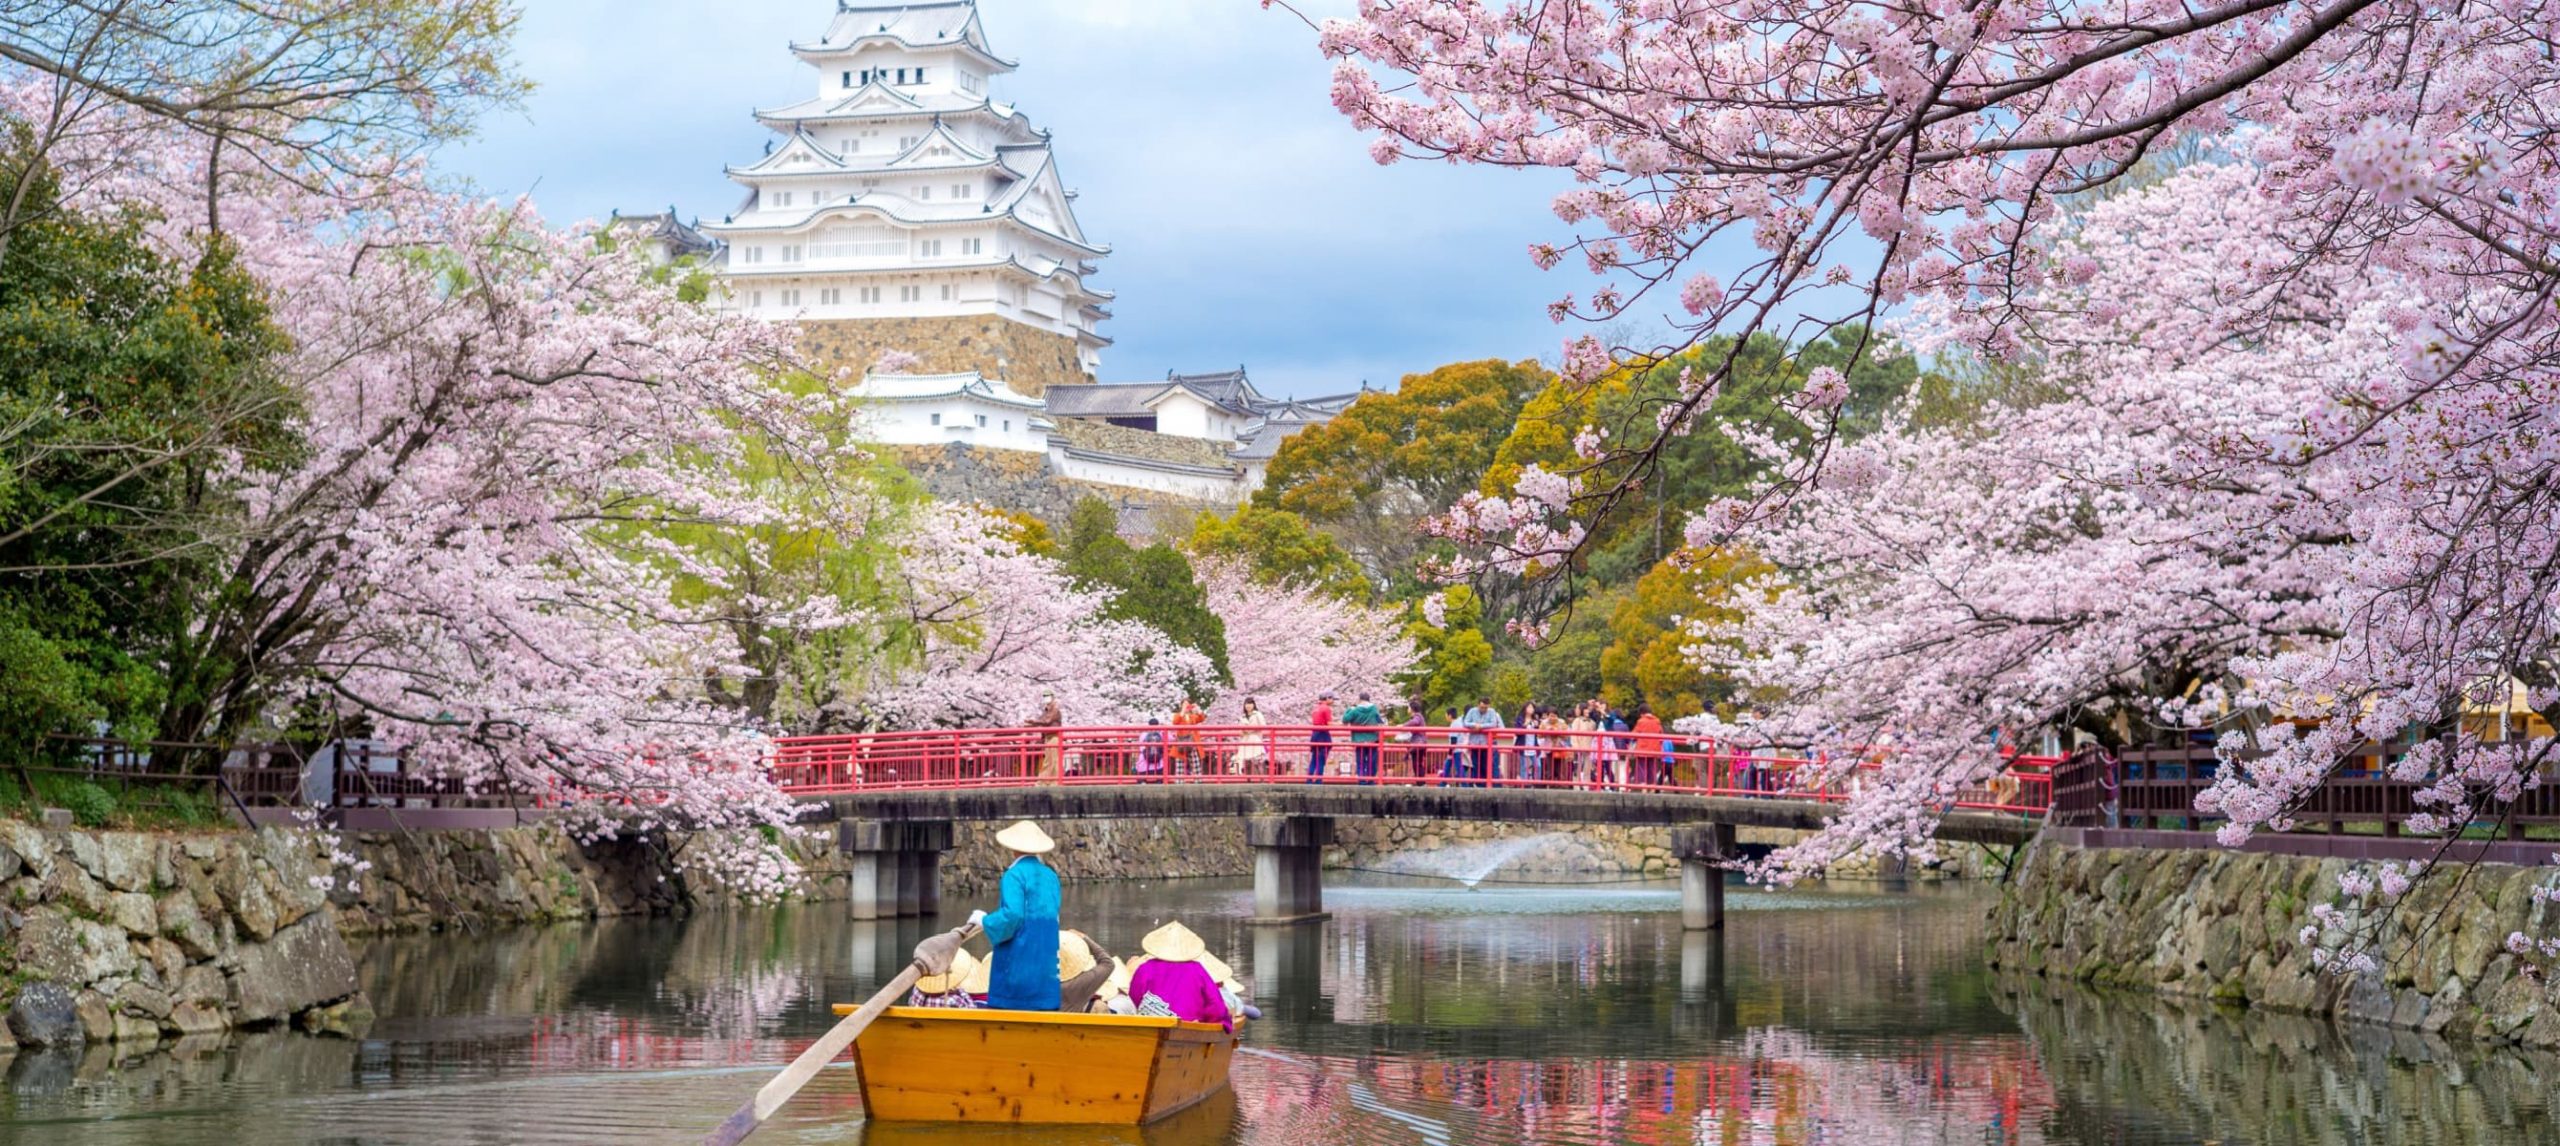 Boat navigating through a canal surrounded by cherry trees, in Kyoto.